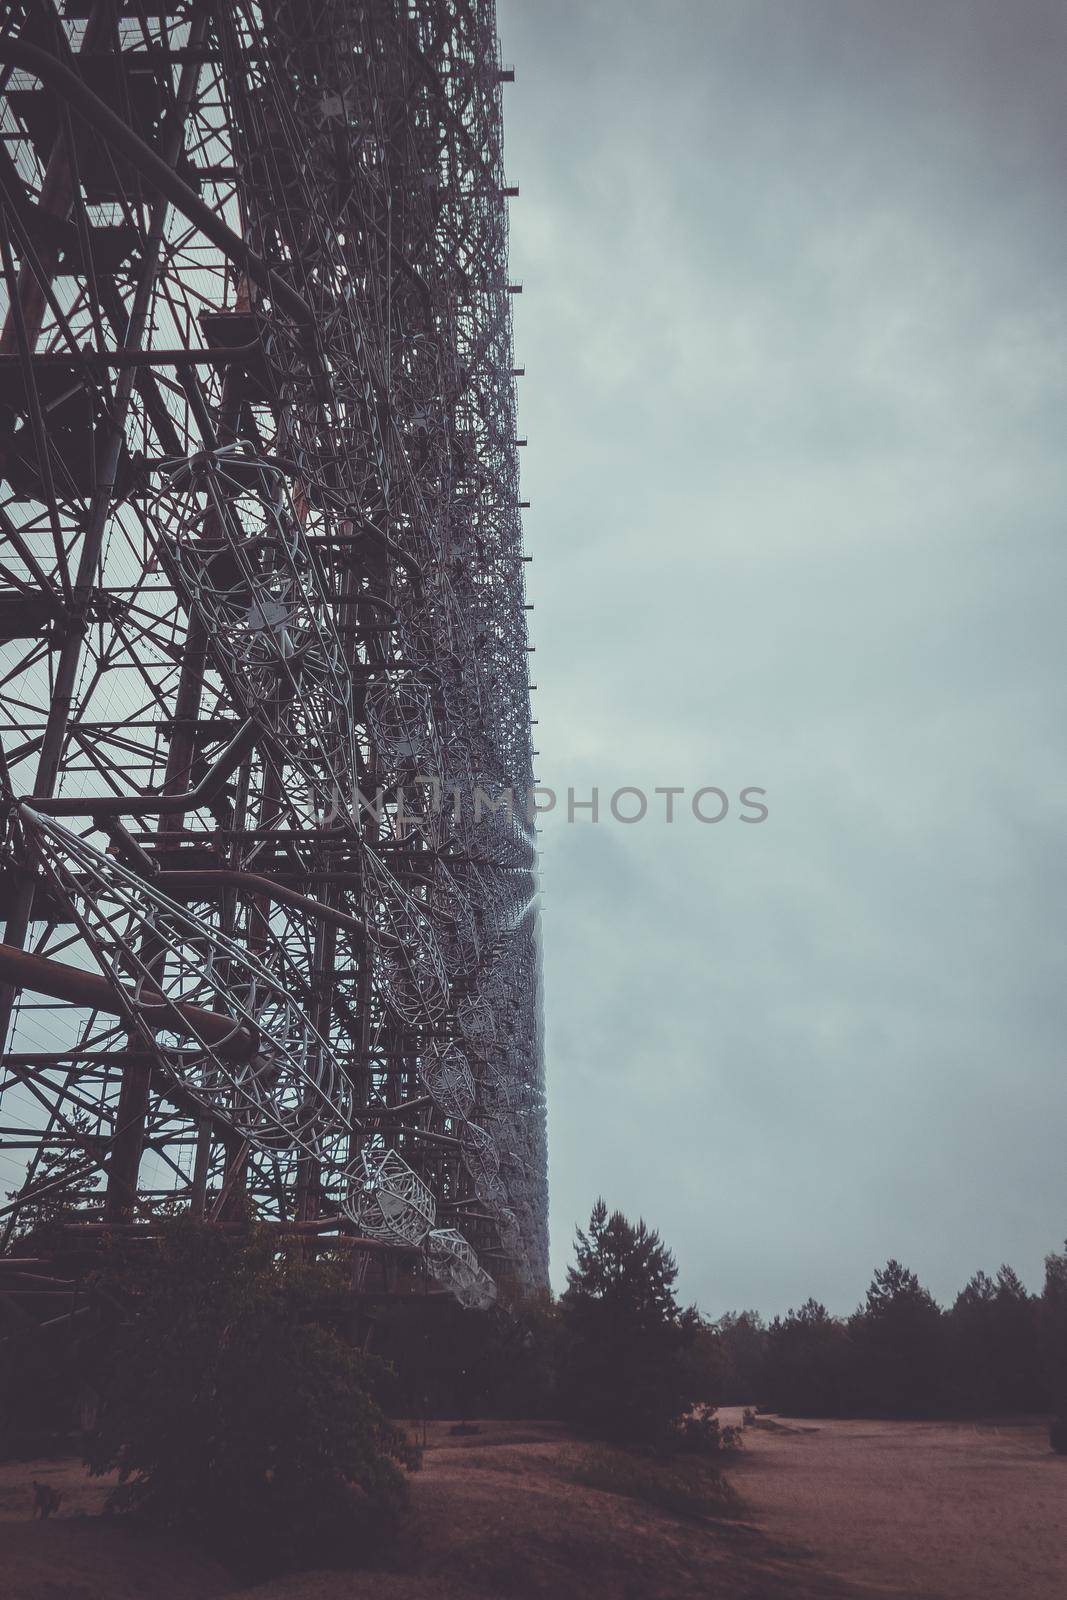 Soviet over-the-horizon radar station Duga in the Chernobyl exclusion zone